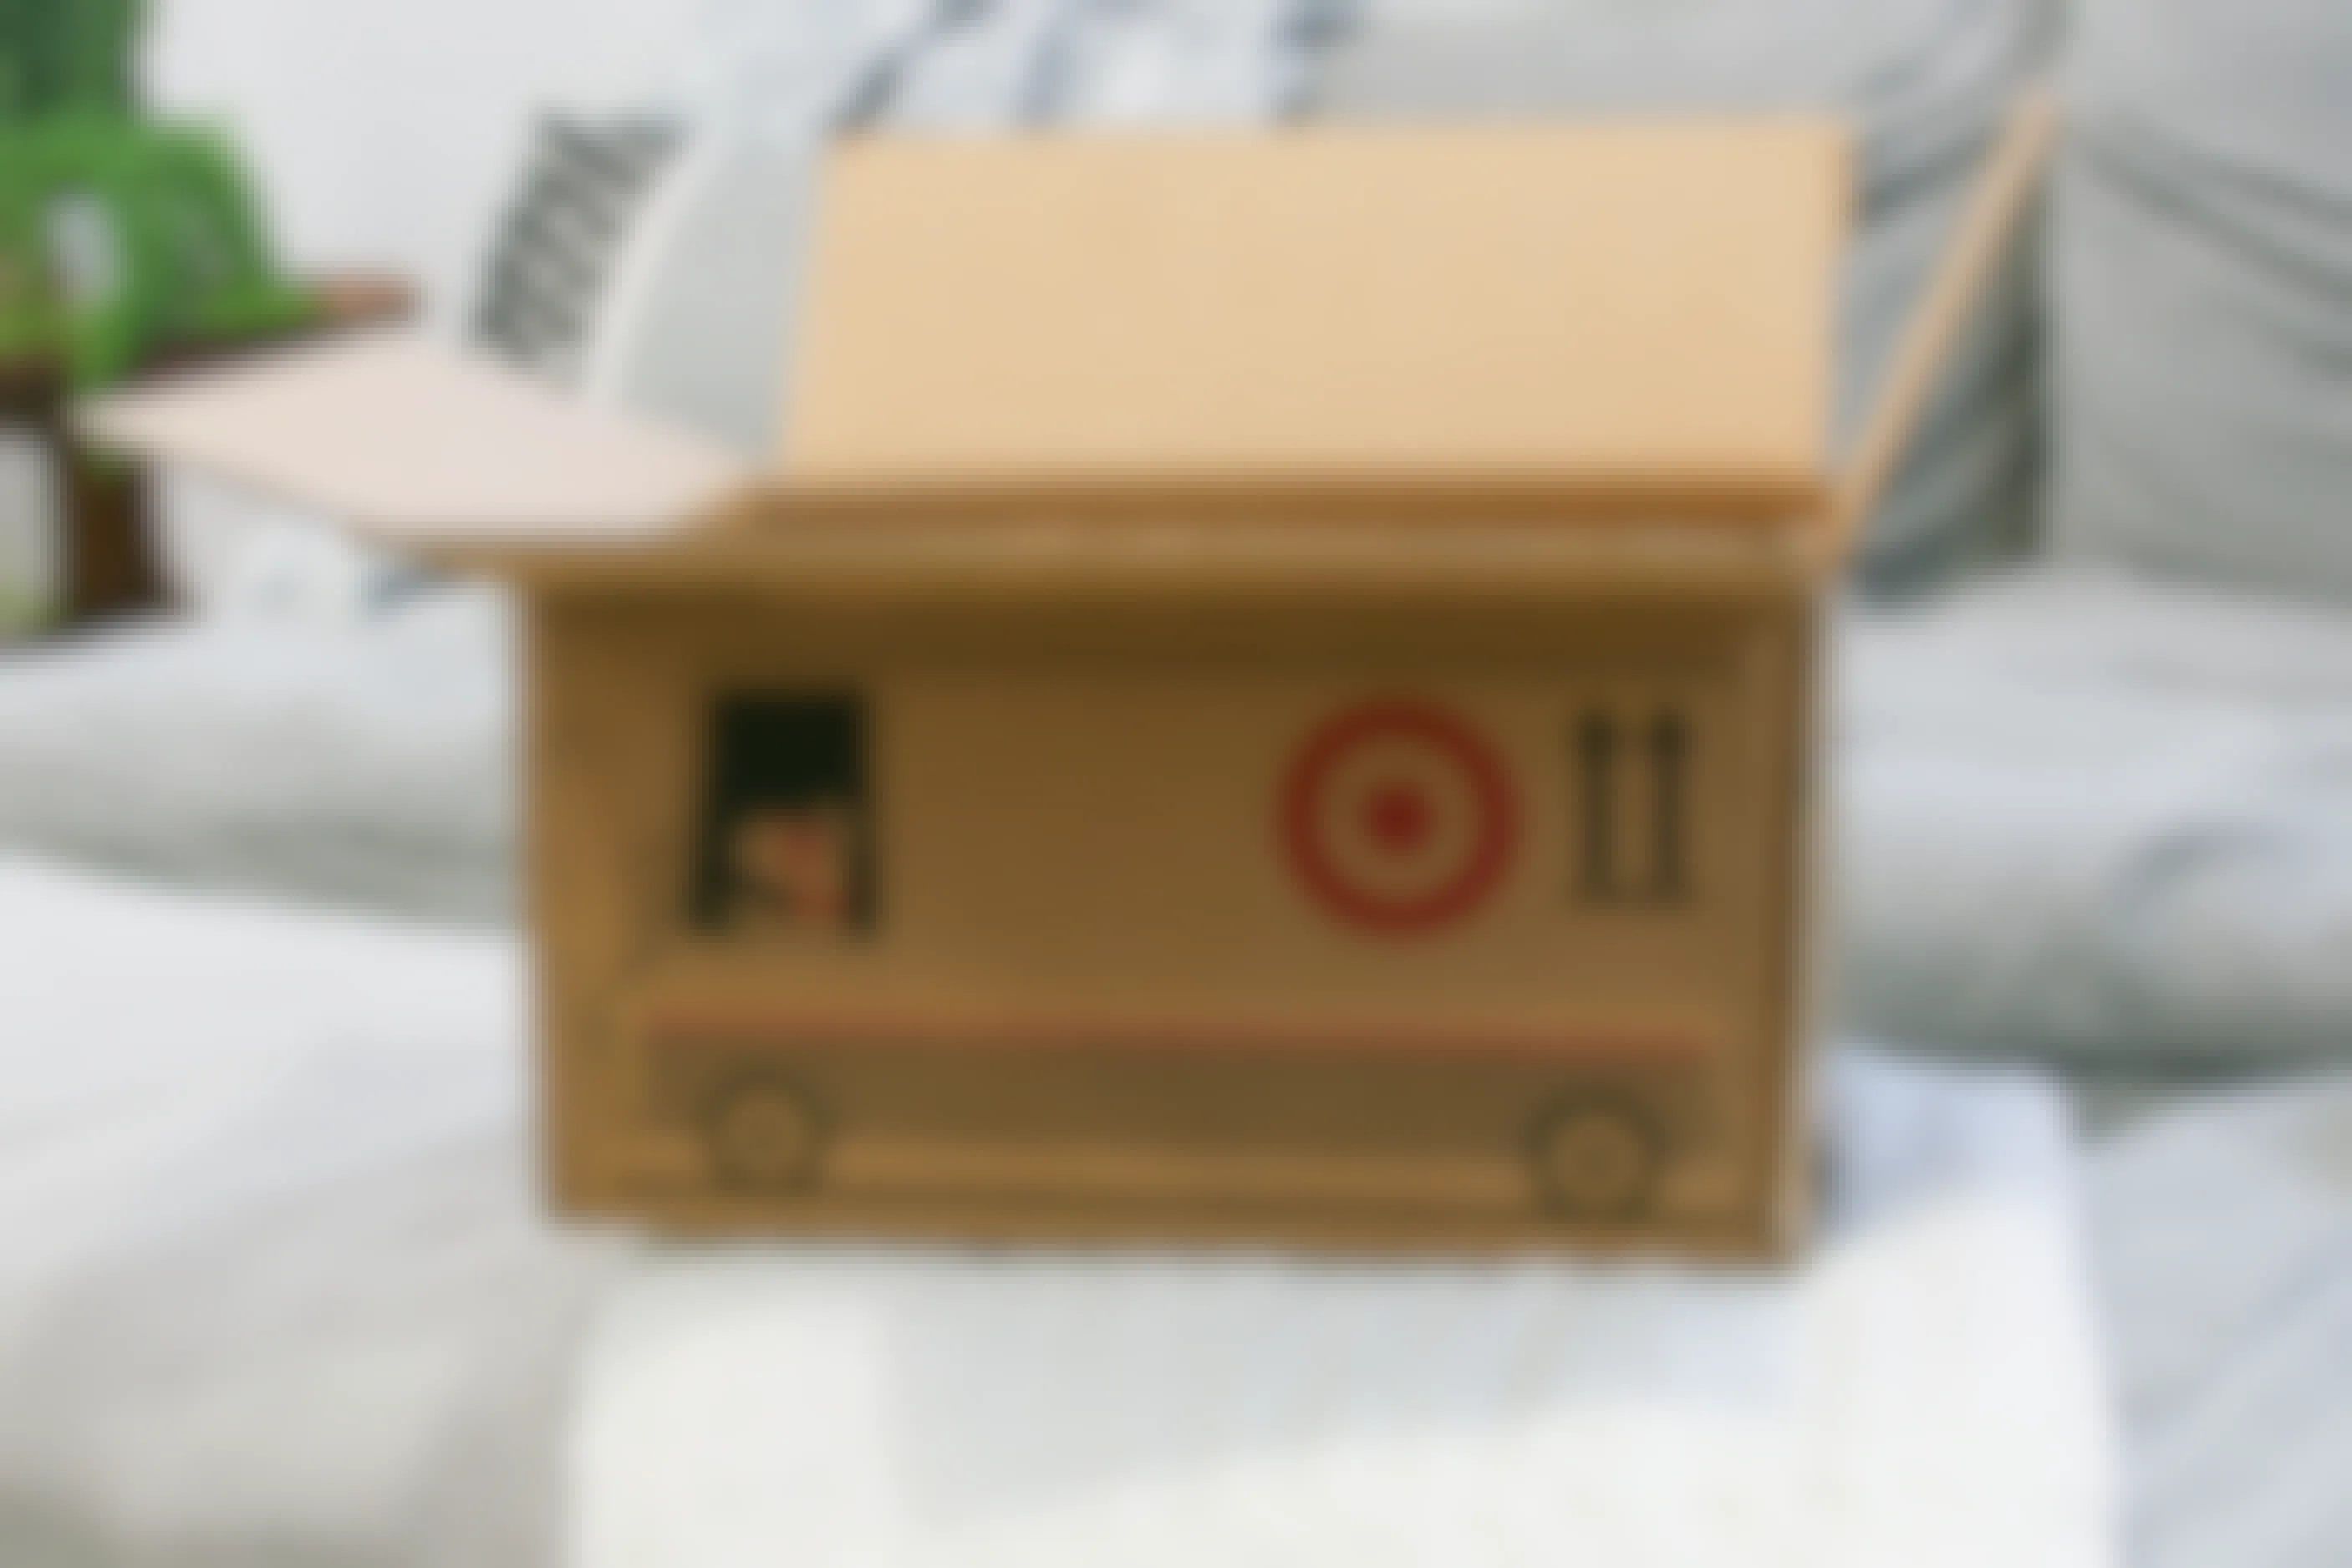 An open Target shipping box sitting on a couch.